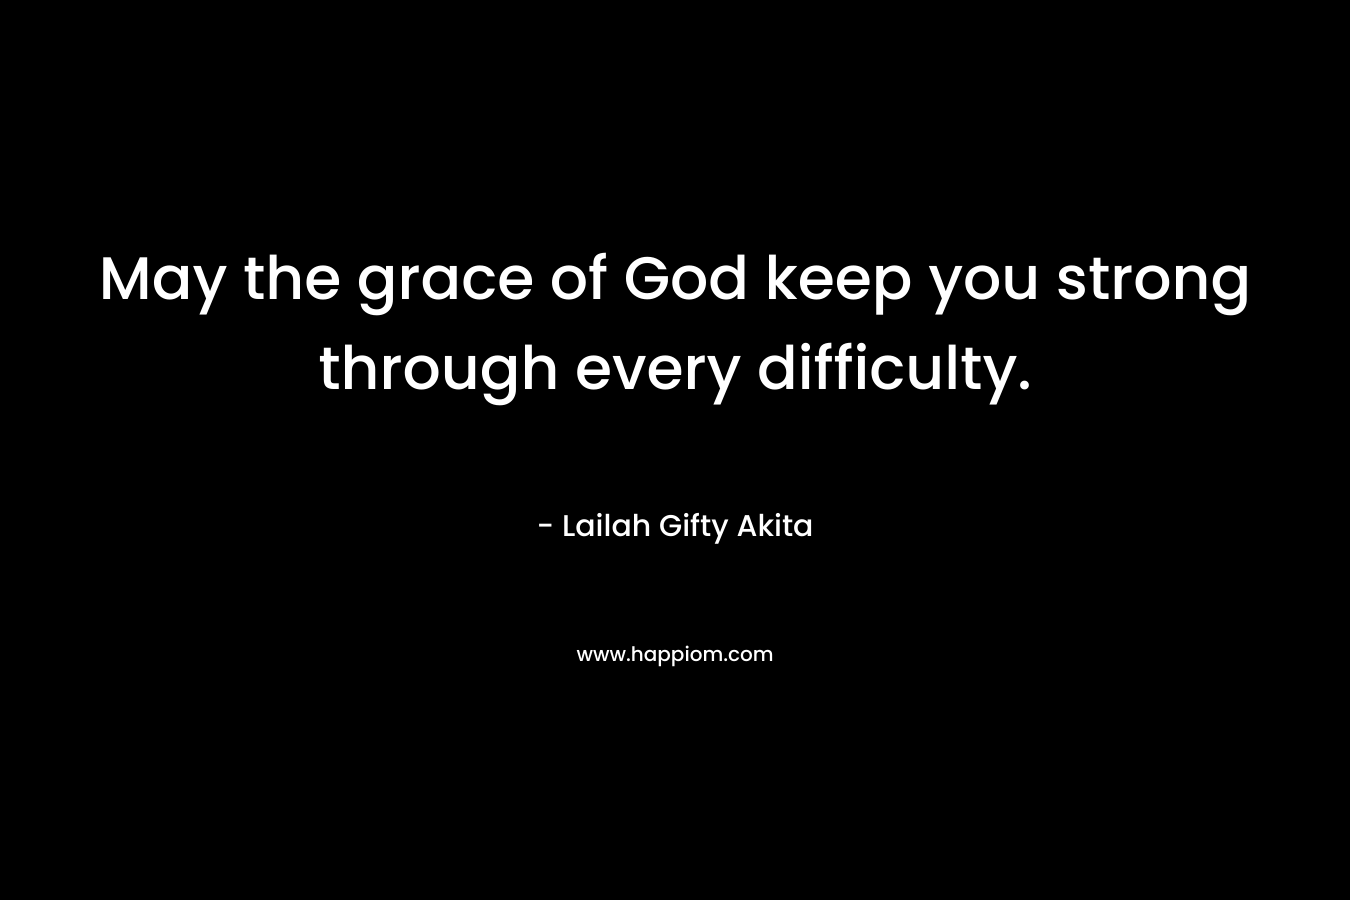 May the grace of God keep you strong through every difficulty.